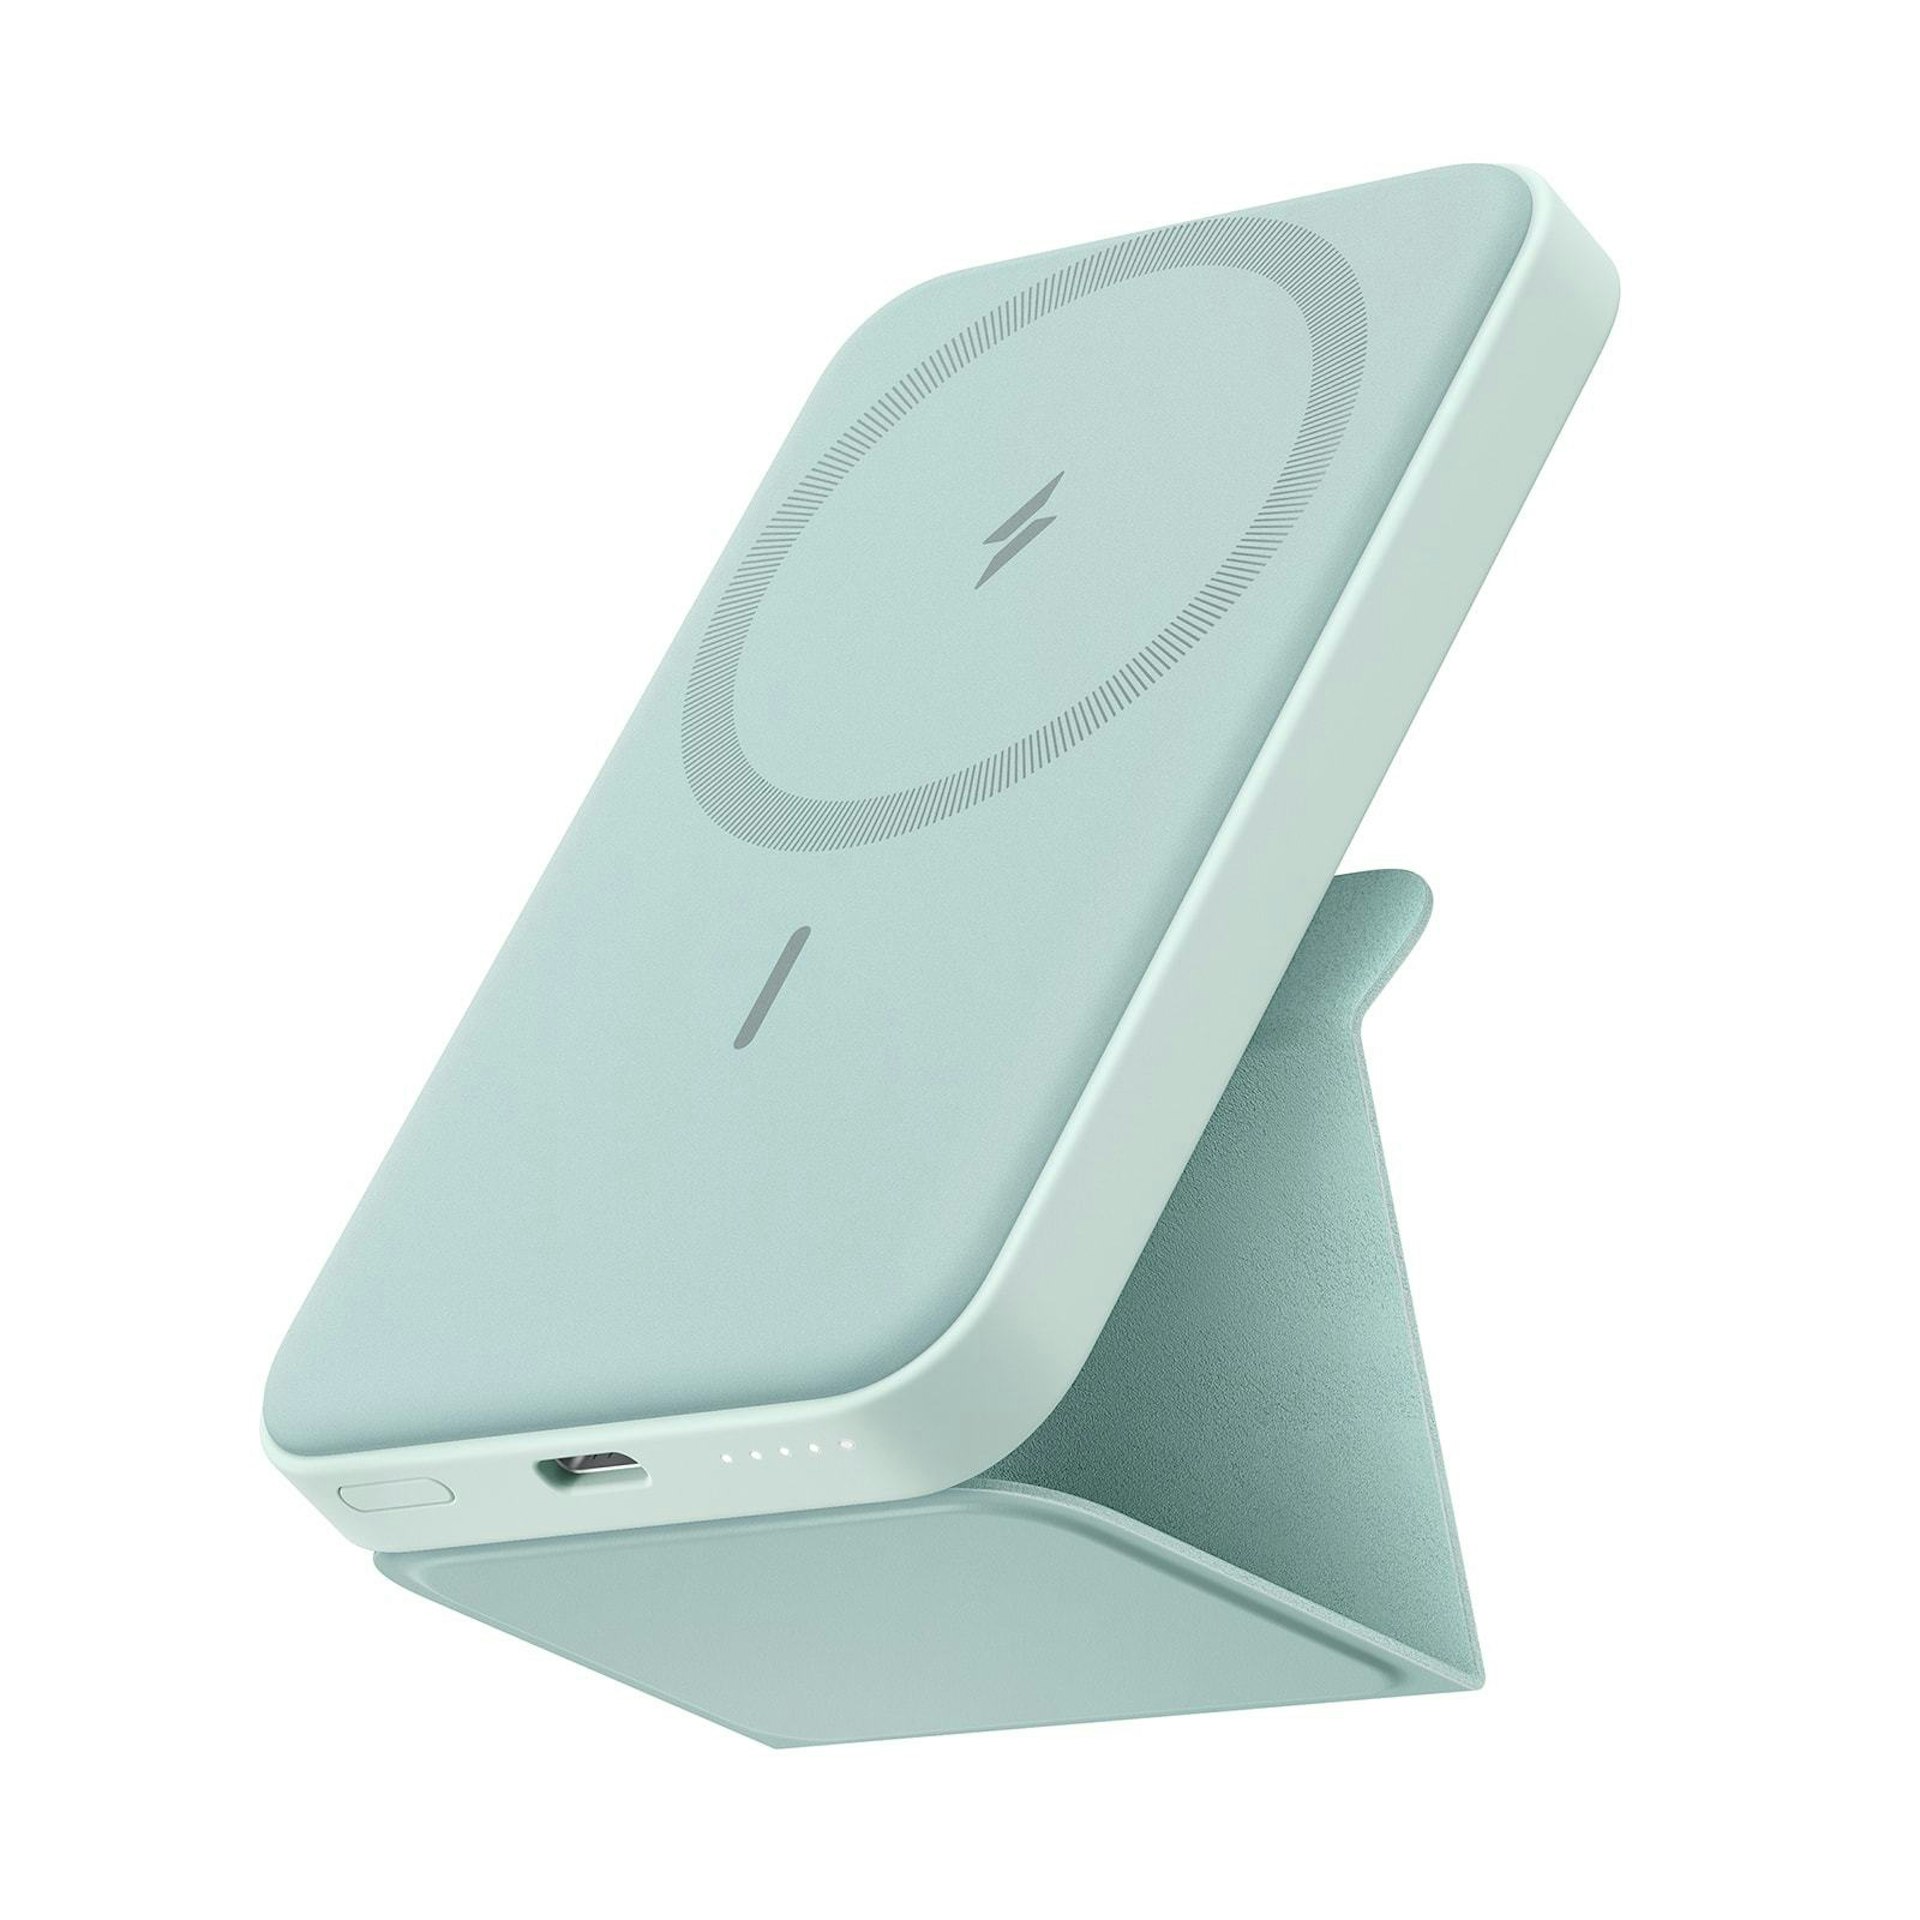 The Anker 622 Magnetic Battery in mint green, propped up with the kickstand